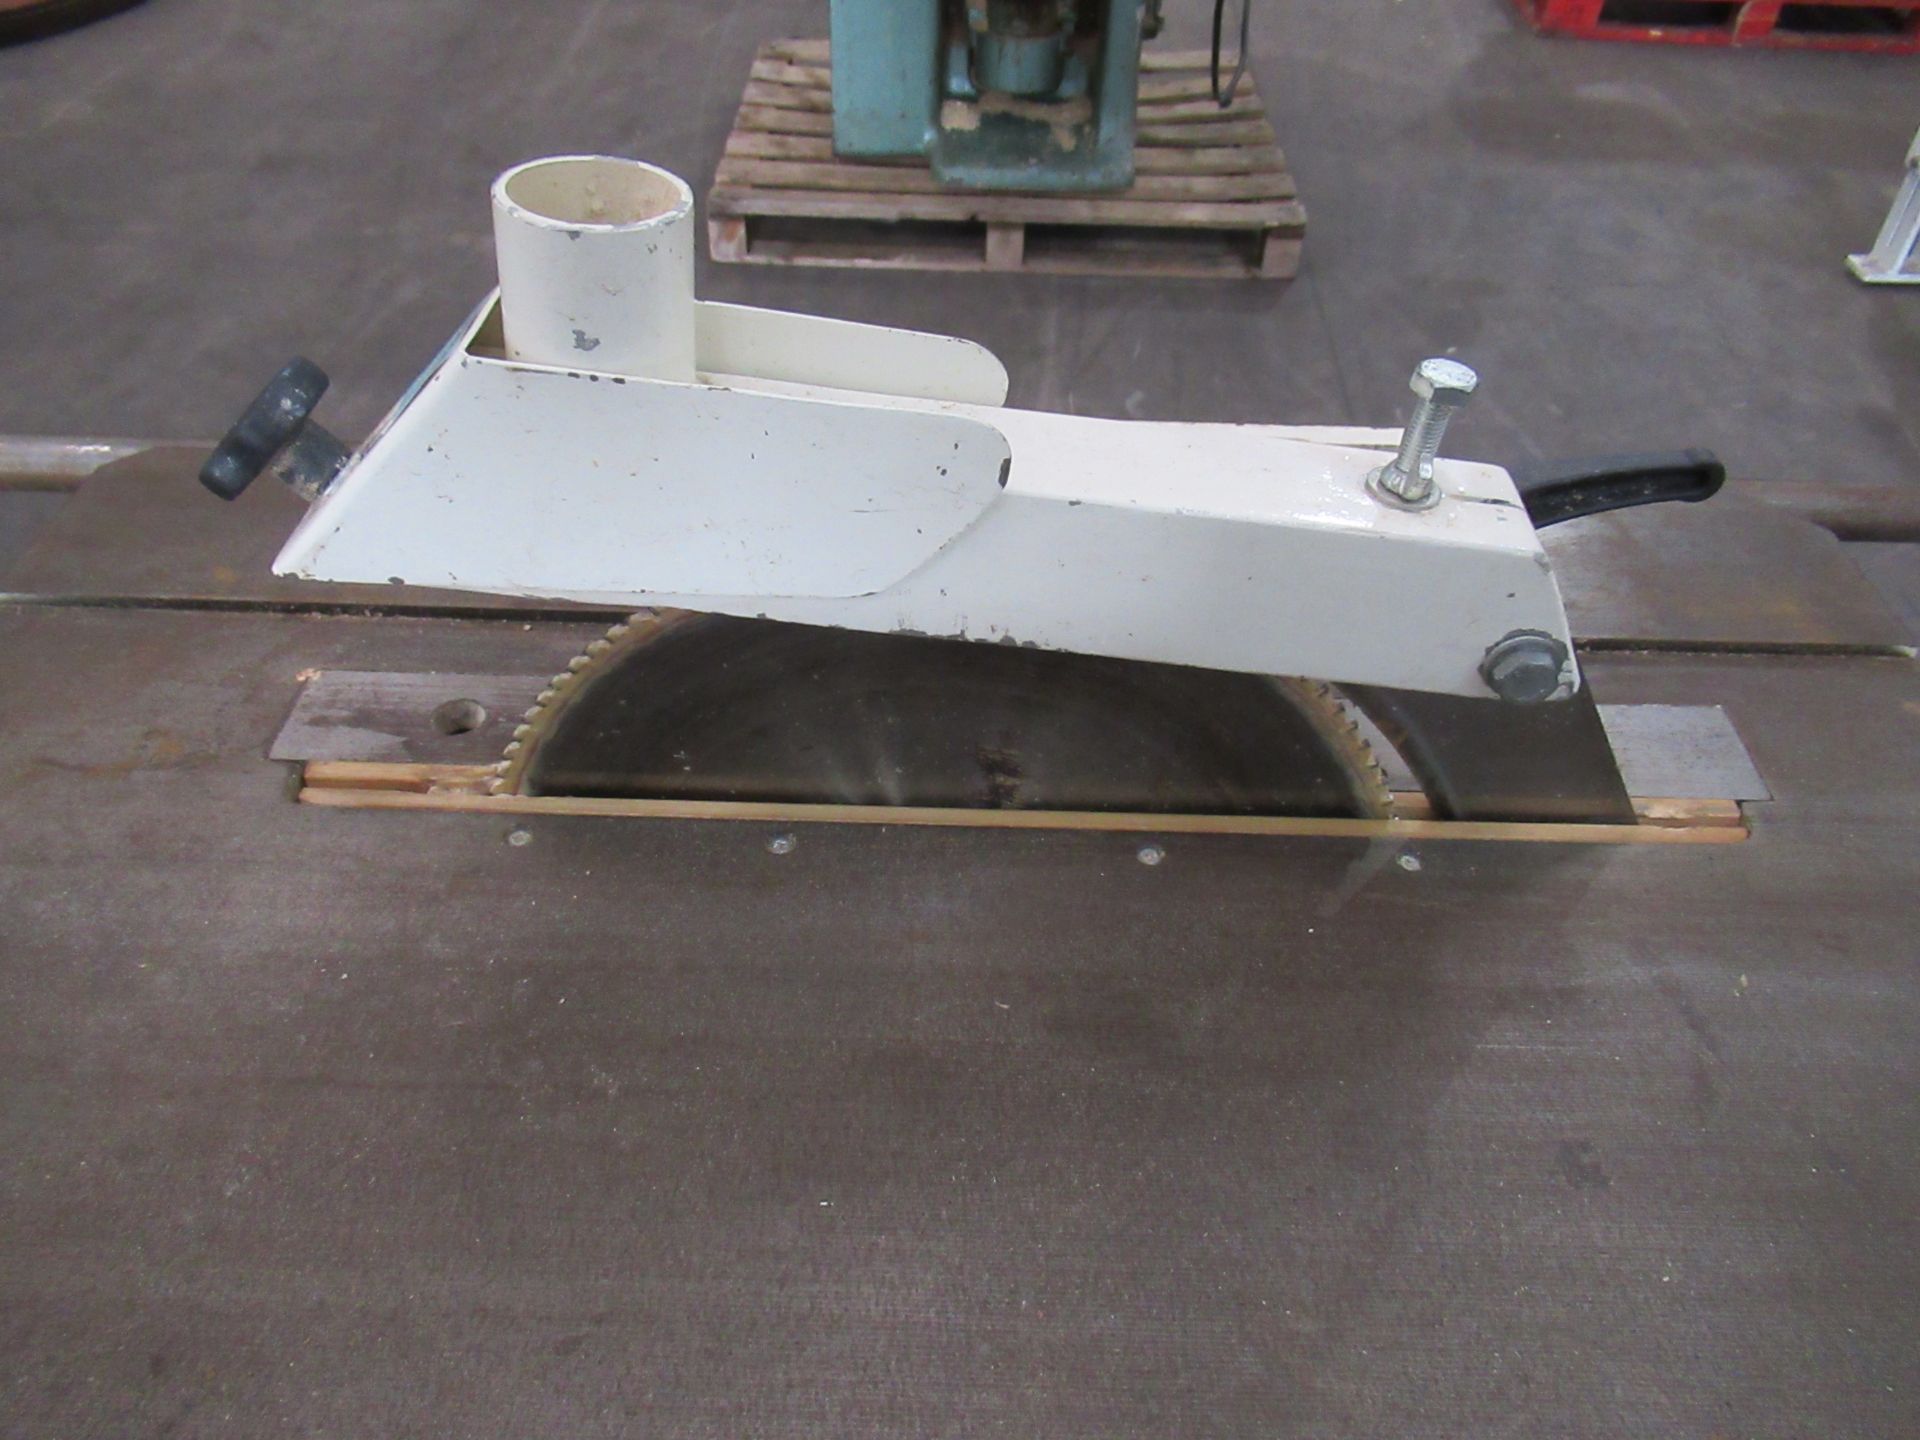 A Sedgwick LK Ripsaw with Sliding Table - 3ph - Image 5 of 7